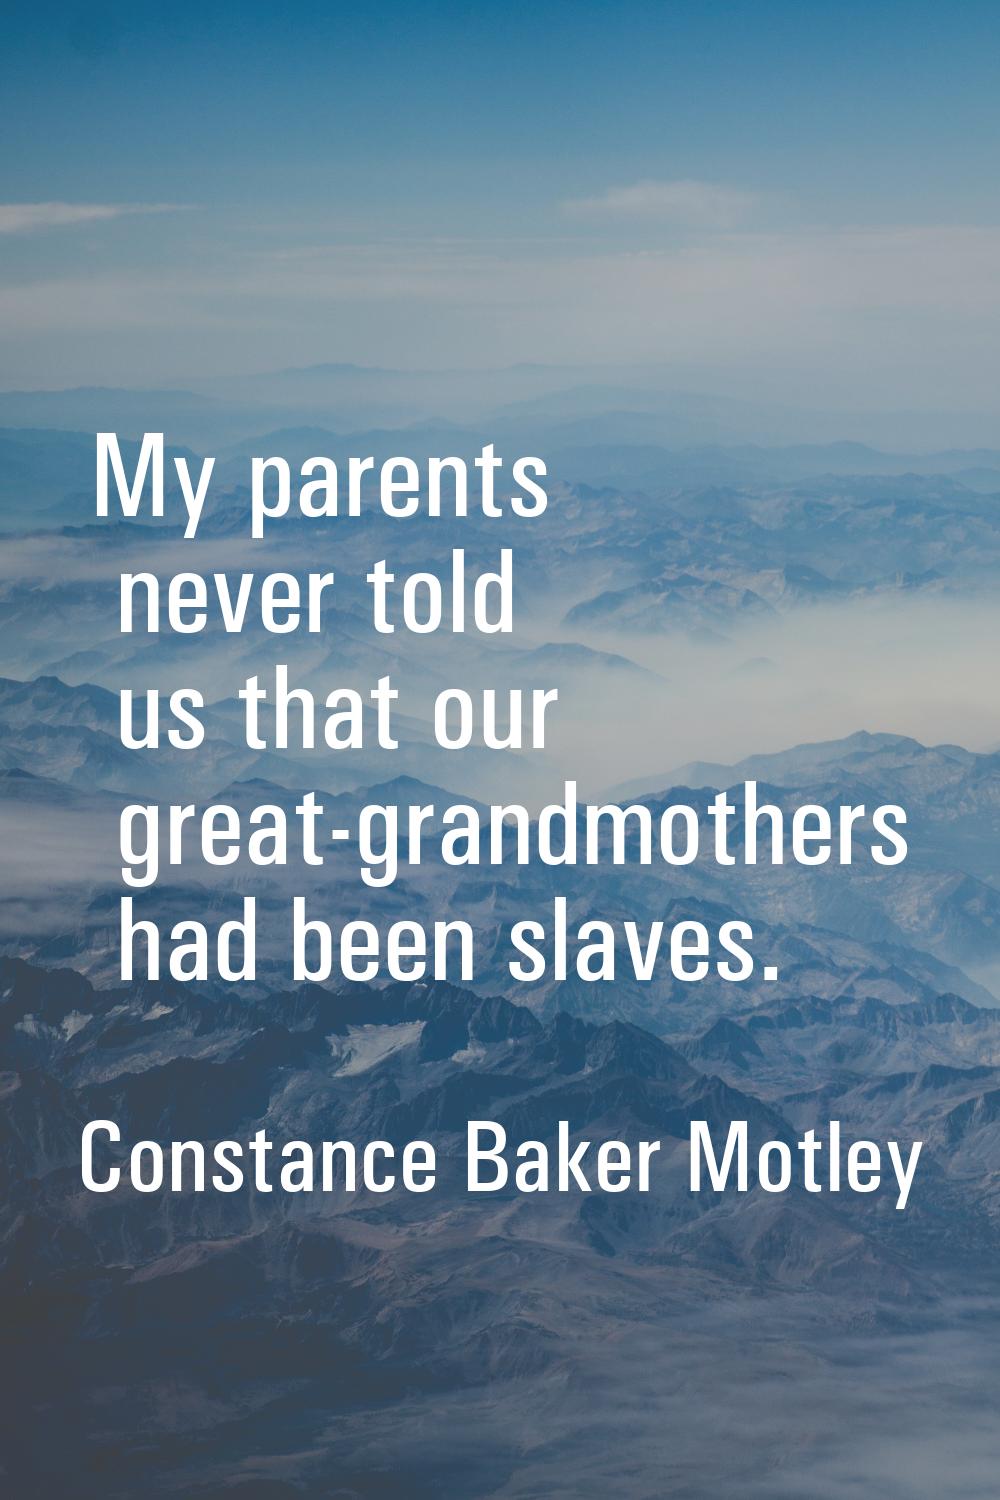 My parents never told us that our great-grandmothers had been slaves.